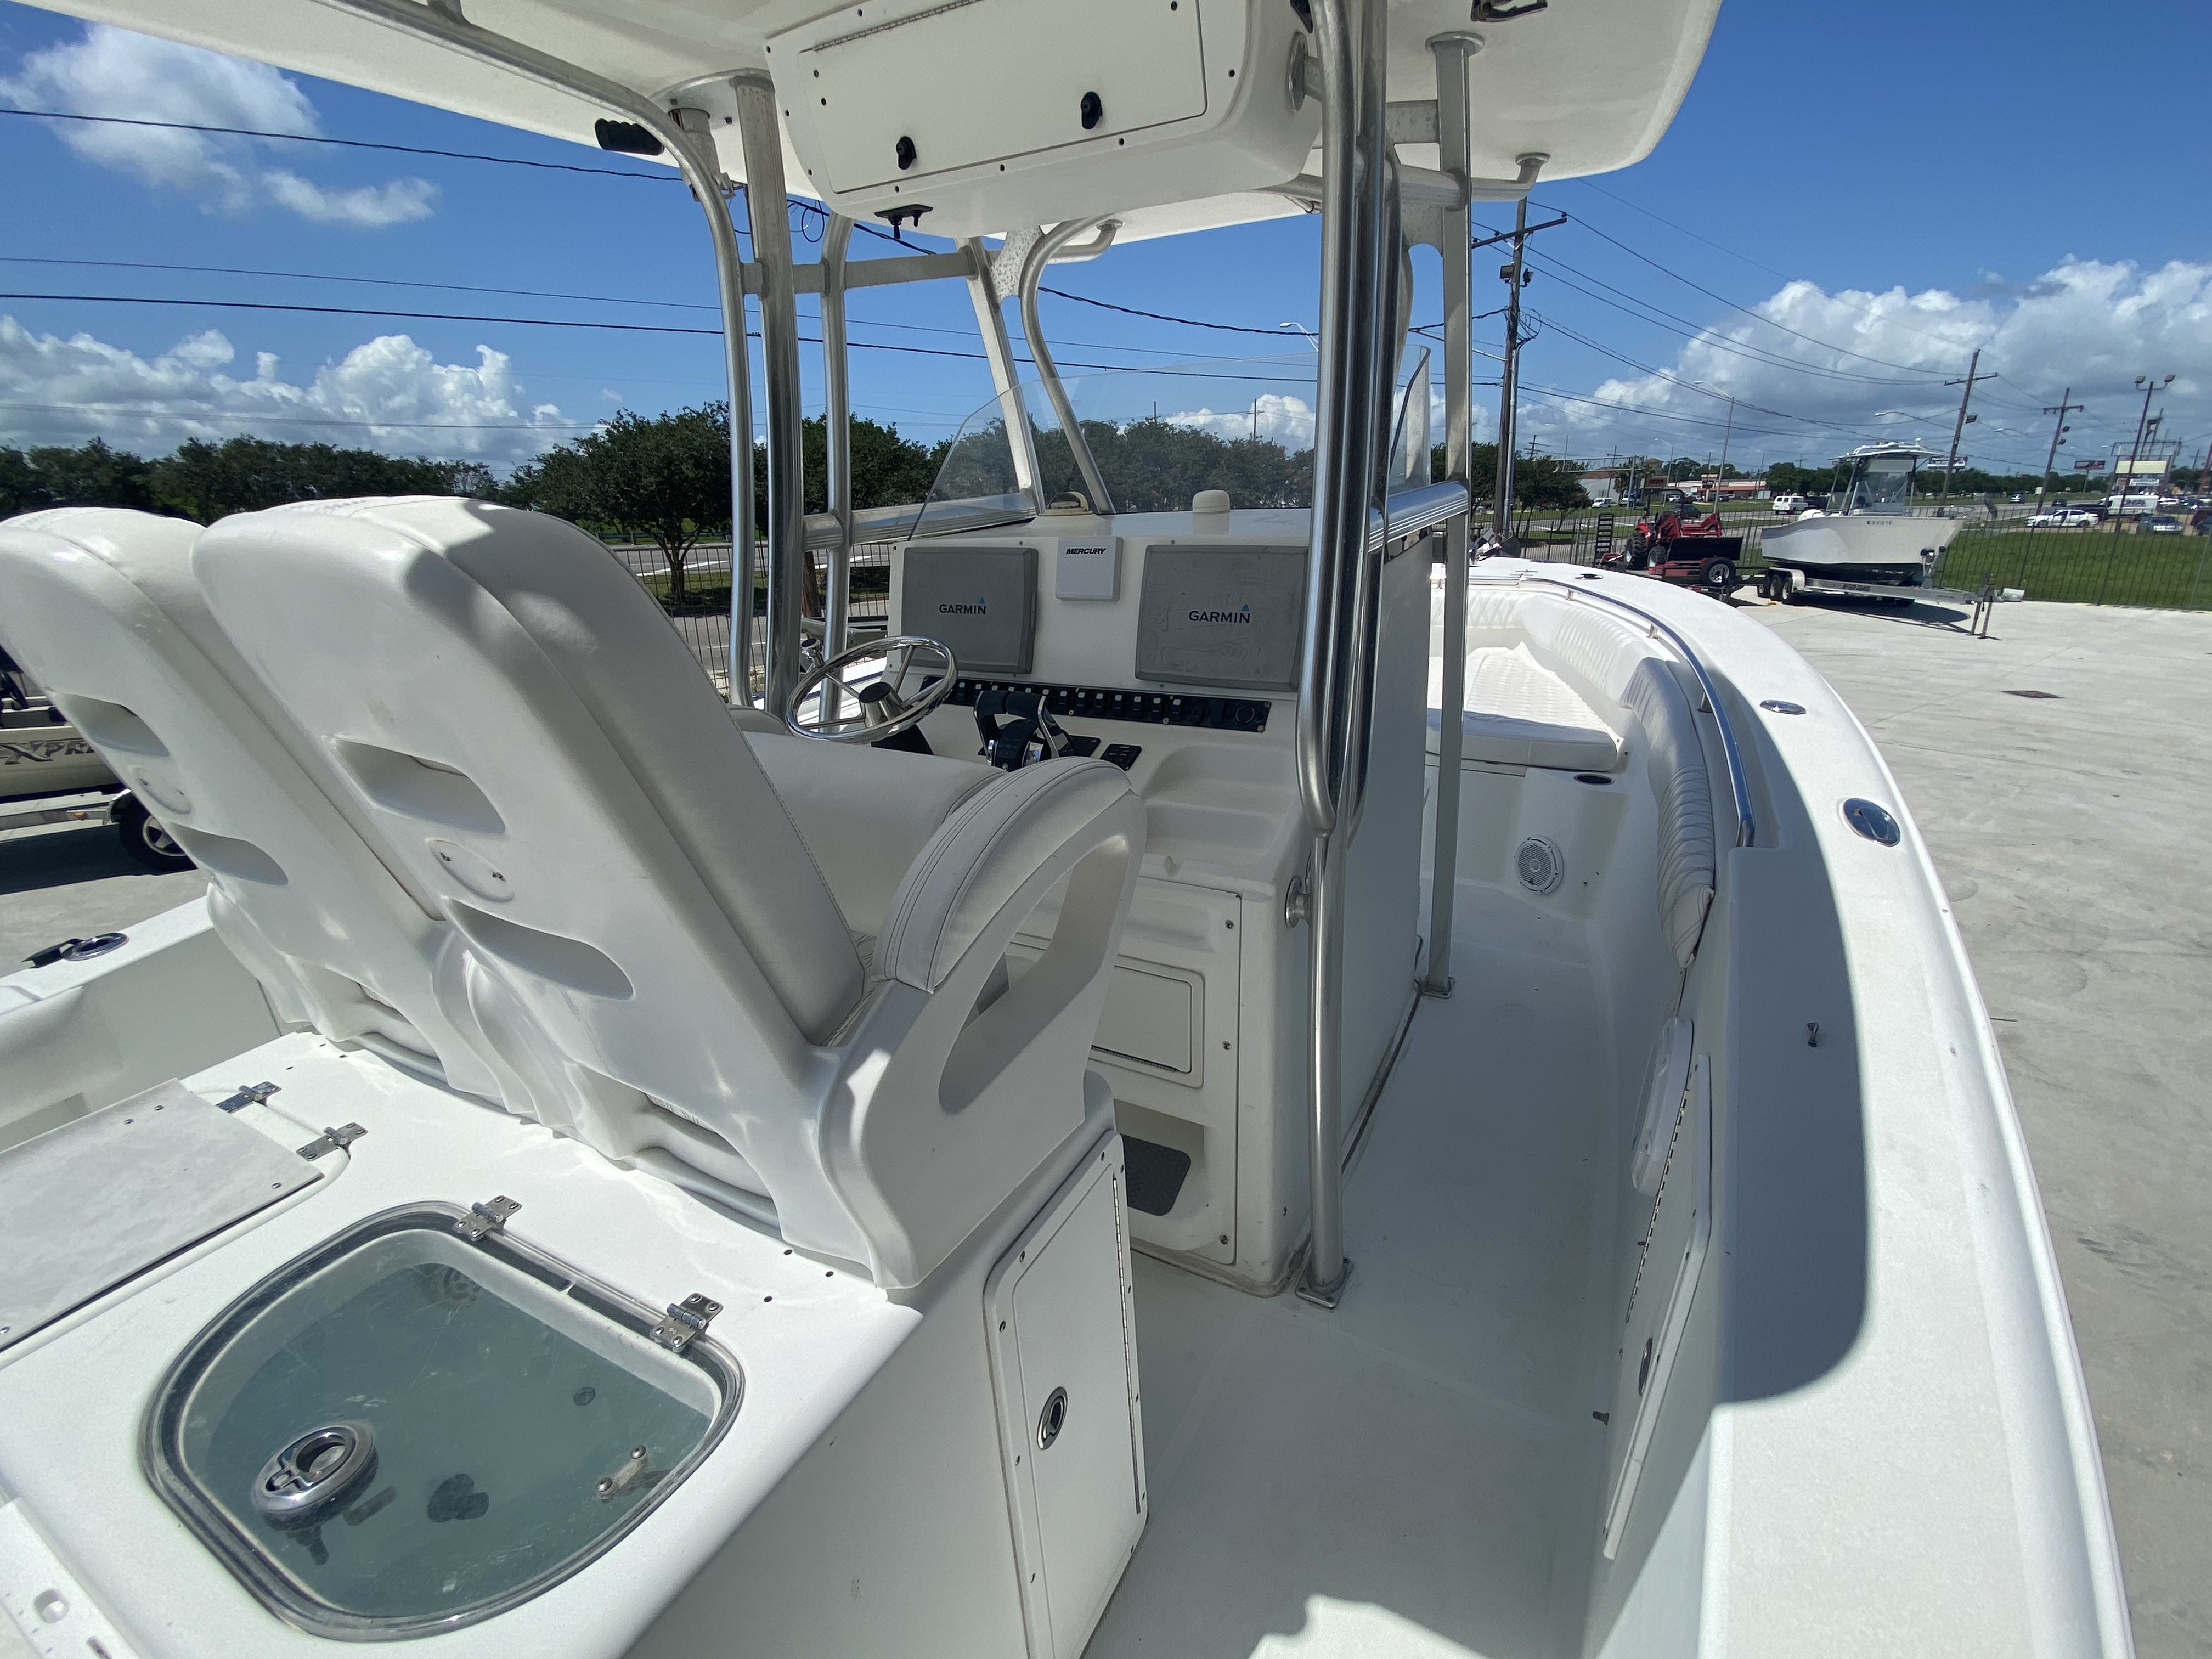 2008 Sea Hunt boat for sale, model of the boat is 29 Gamefish & Image # 27 of 31